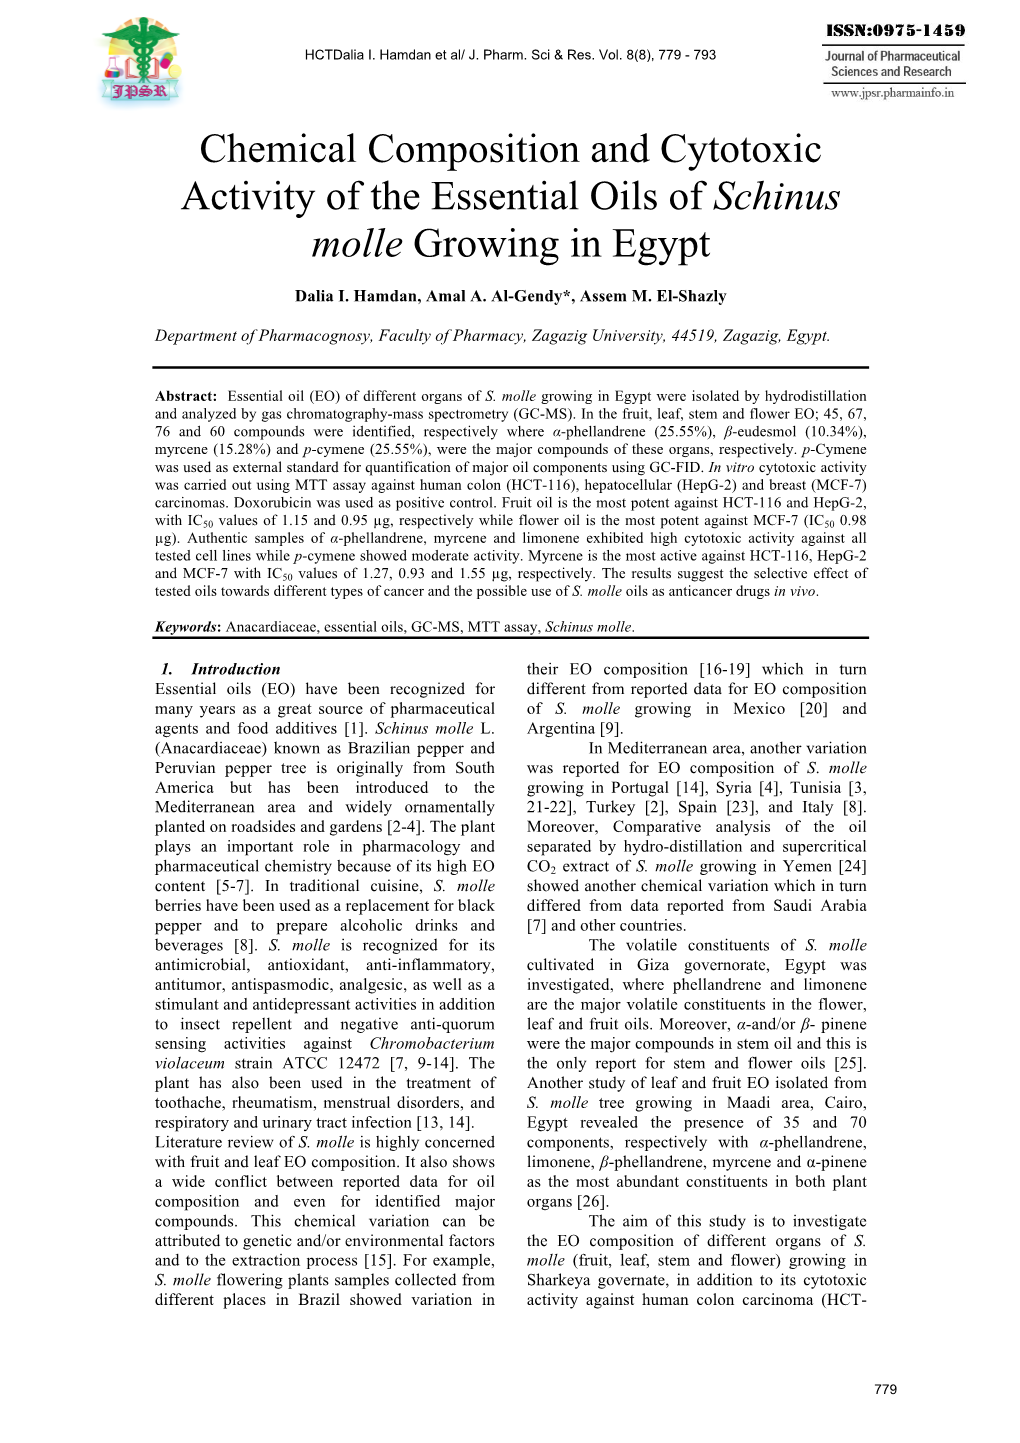 Chemical Composition and Cytotoxic Activity of the Essential Oils of Schinus Molle Growing in Egypt